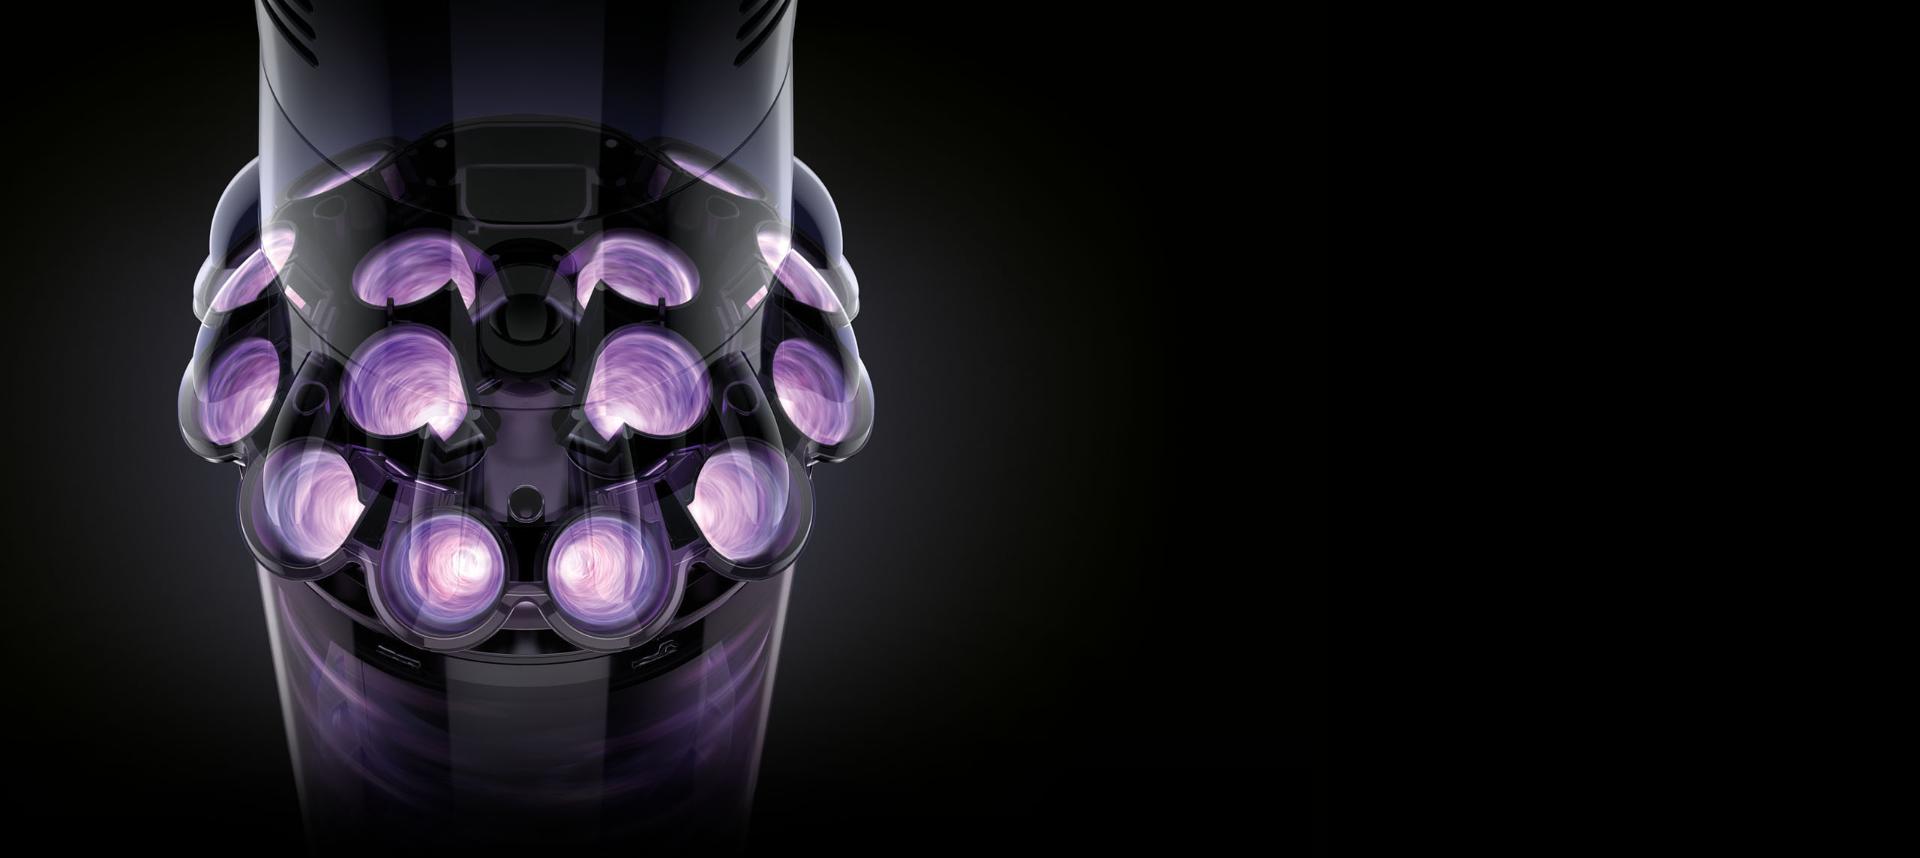 Graphic of Dyson Cyclone V10™ vacuum cyclone array